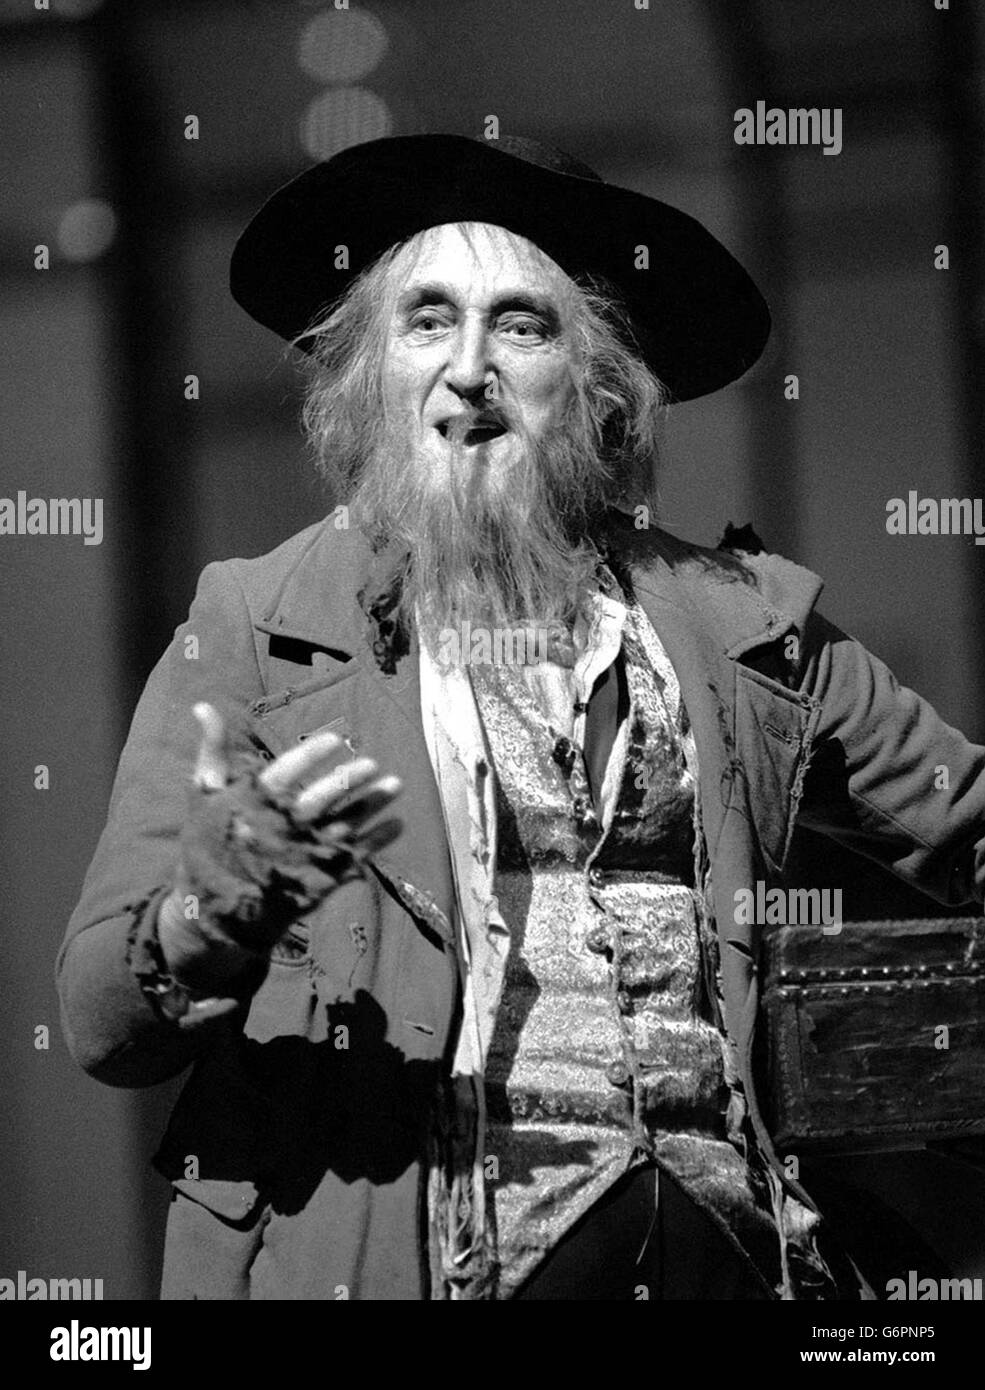 Ron Moody as Fagin during rehearsals for the 1985 Royal Variety Performance in London. 01/02/2003; Original Oliver! villain Moody is returning to his signature role - pickpocket Fagin at The Marlowe Theatre in Canterbury this Easter. The 80-year-old star was nominated for an Oscar for his star part in the 1968 classic film. But it is 20 years since London-born Moody last starred as the Dickens character, donning fingerless gloves and threadbare coat in a West End musical production of the book Oliver Twist. Stock Photo